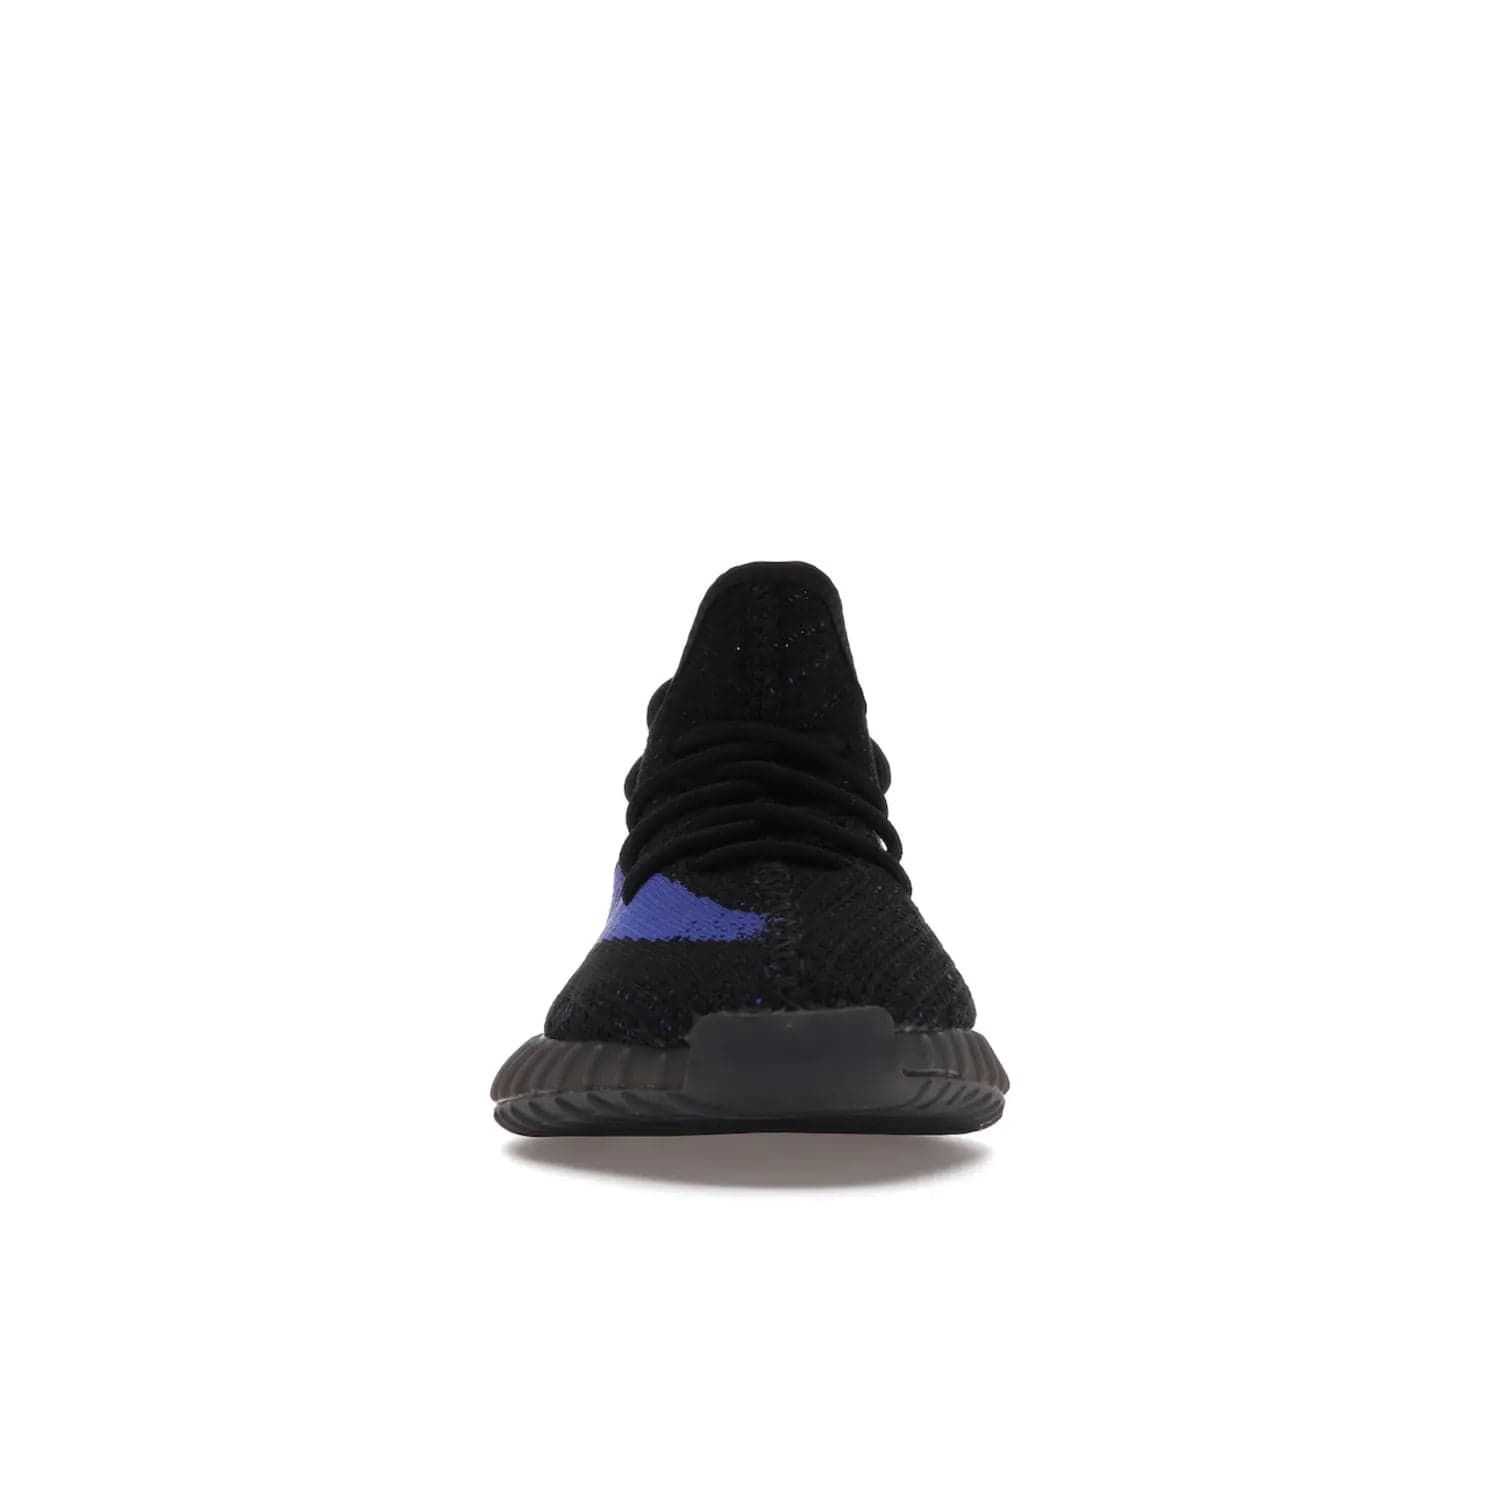 adidas Yeezy Boost 350 V2 Dazzling Blue - Image 10 - Only at www.BallersClubKickz.com - Shop the Adidas Yeezy 350 V2 Dazzling Blue, featuring a solid black Primeknit upper, Dazzling Blue side stripe, “SPLY-350” text, and a muted Boost sole. Releasing Feb 2022, this style is perfect for any shoe fan.